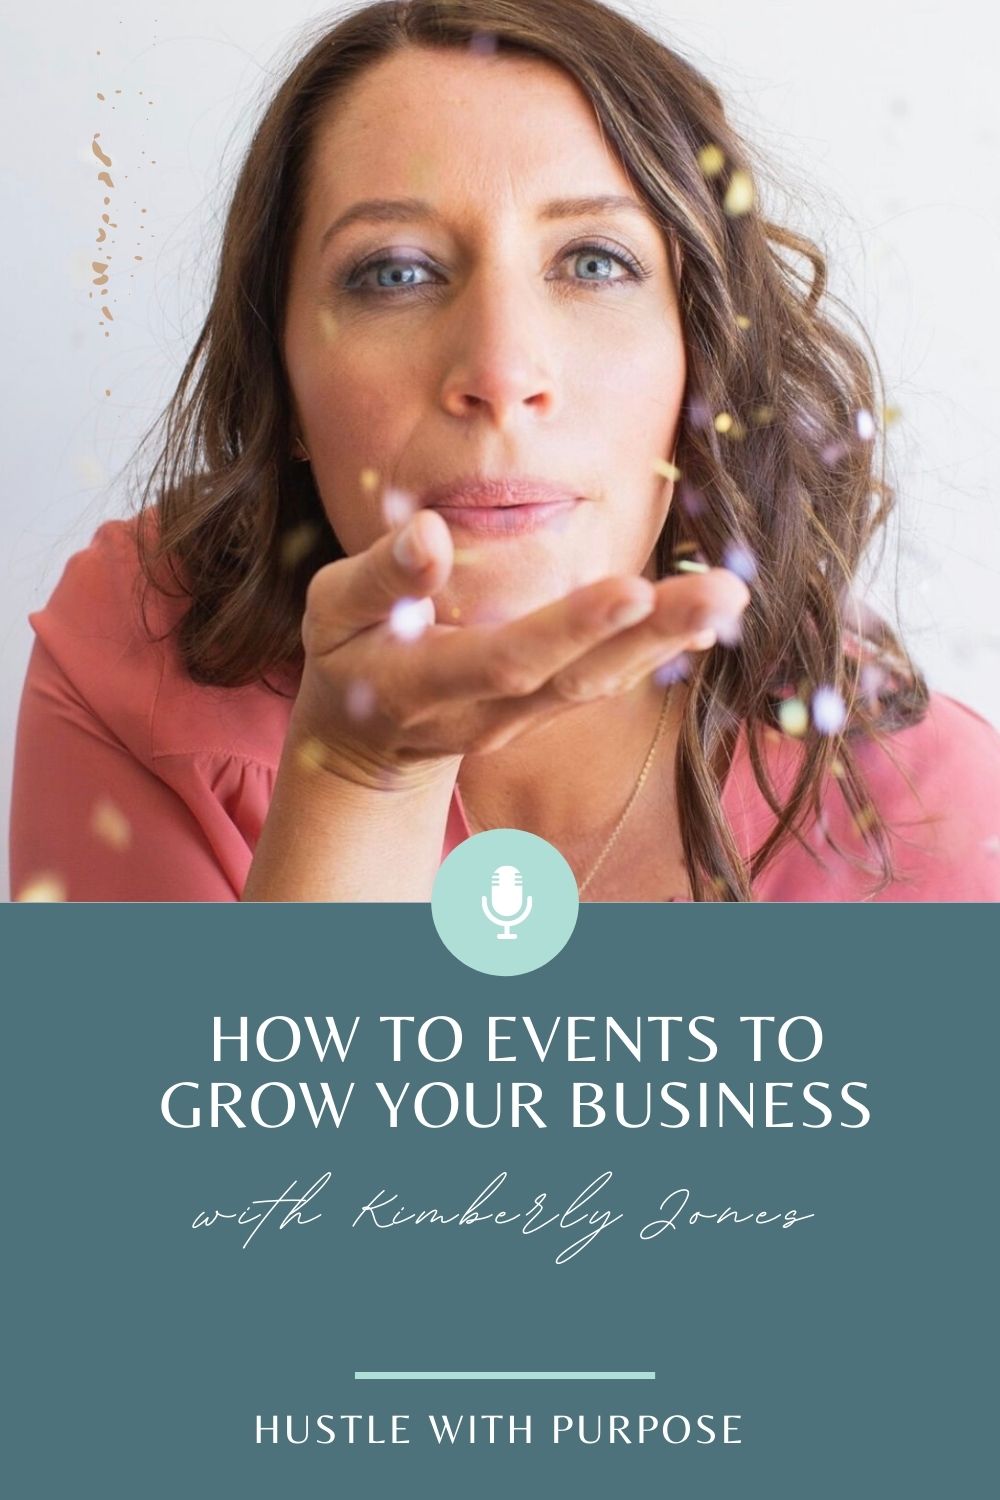 How to Use Events to Grow Your Business